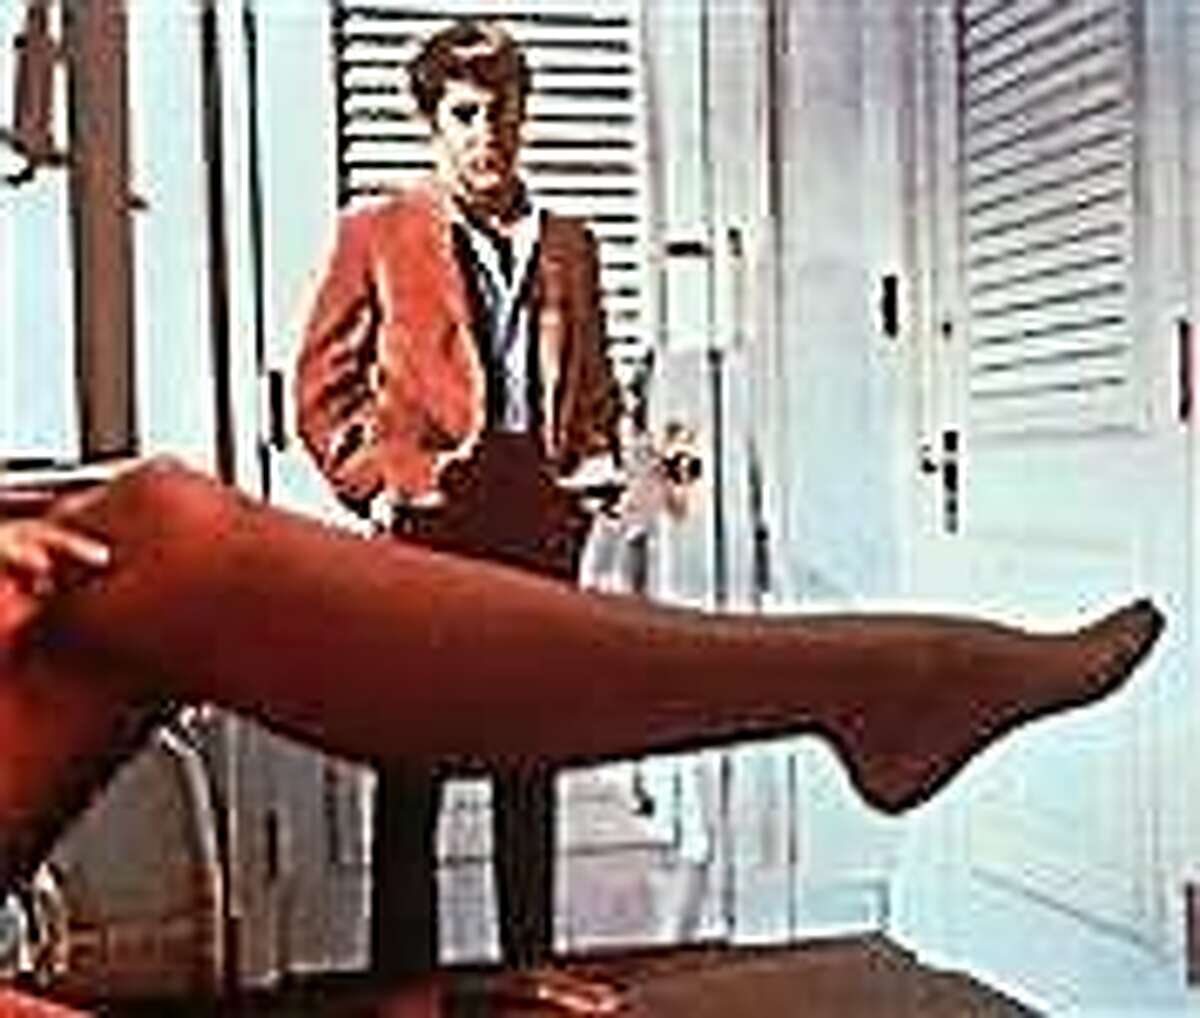 Iconic scene from “The Graduate”